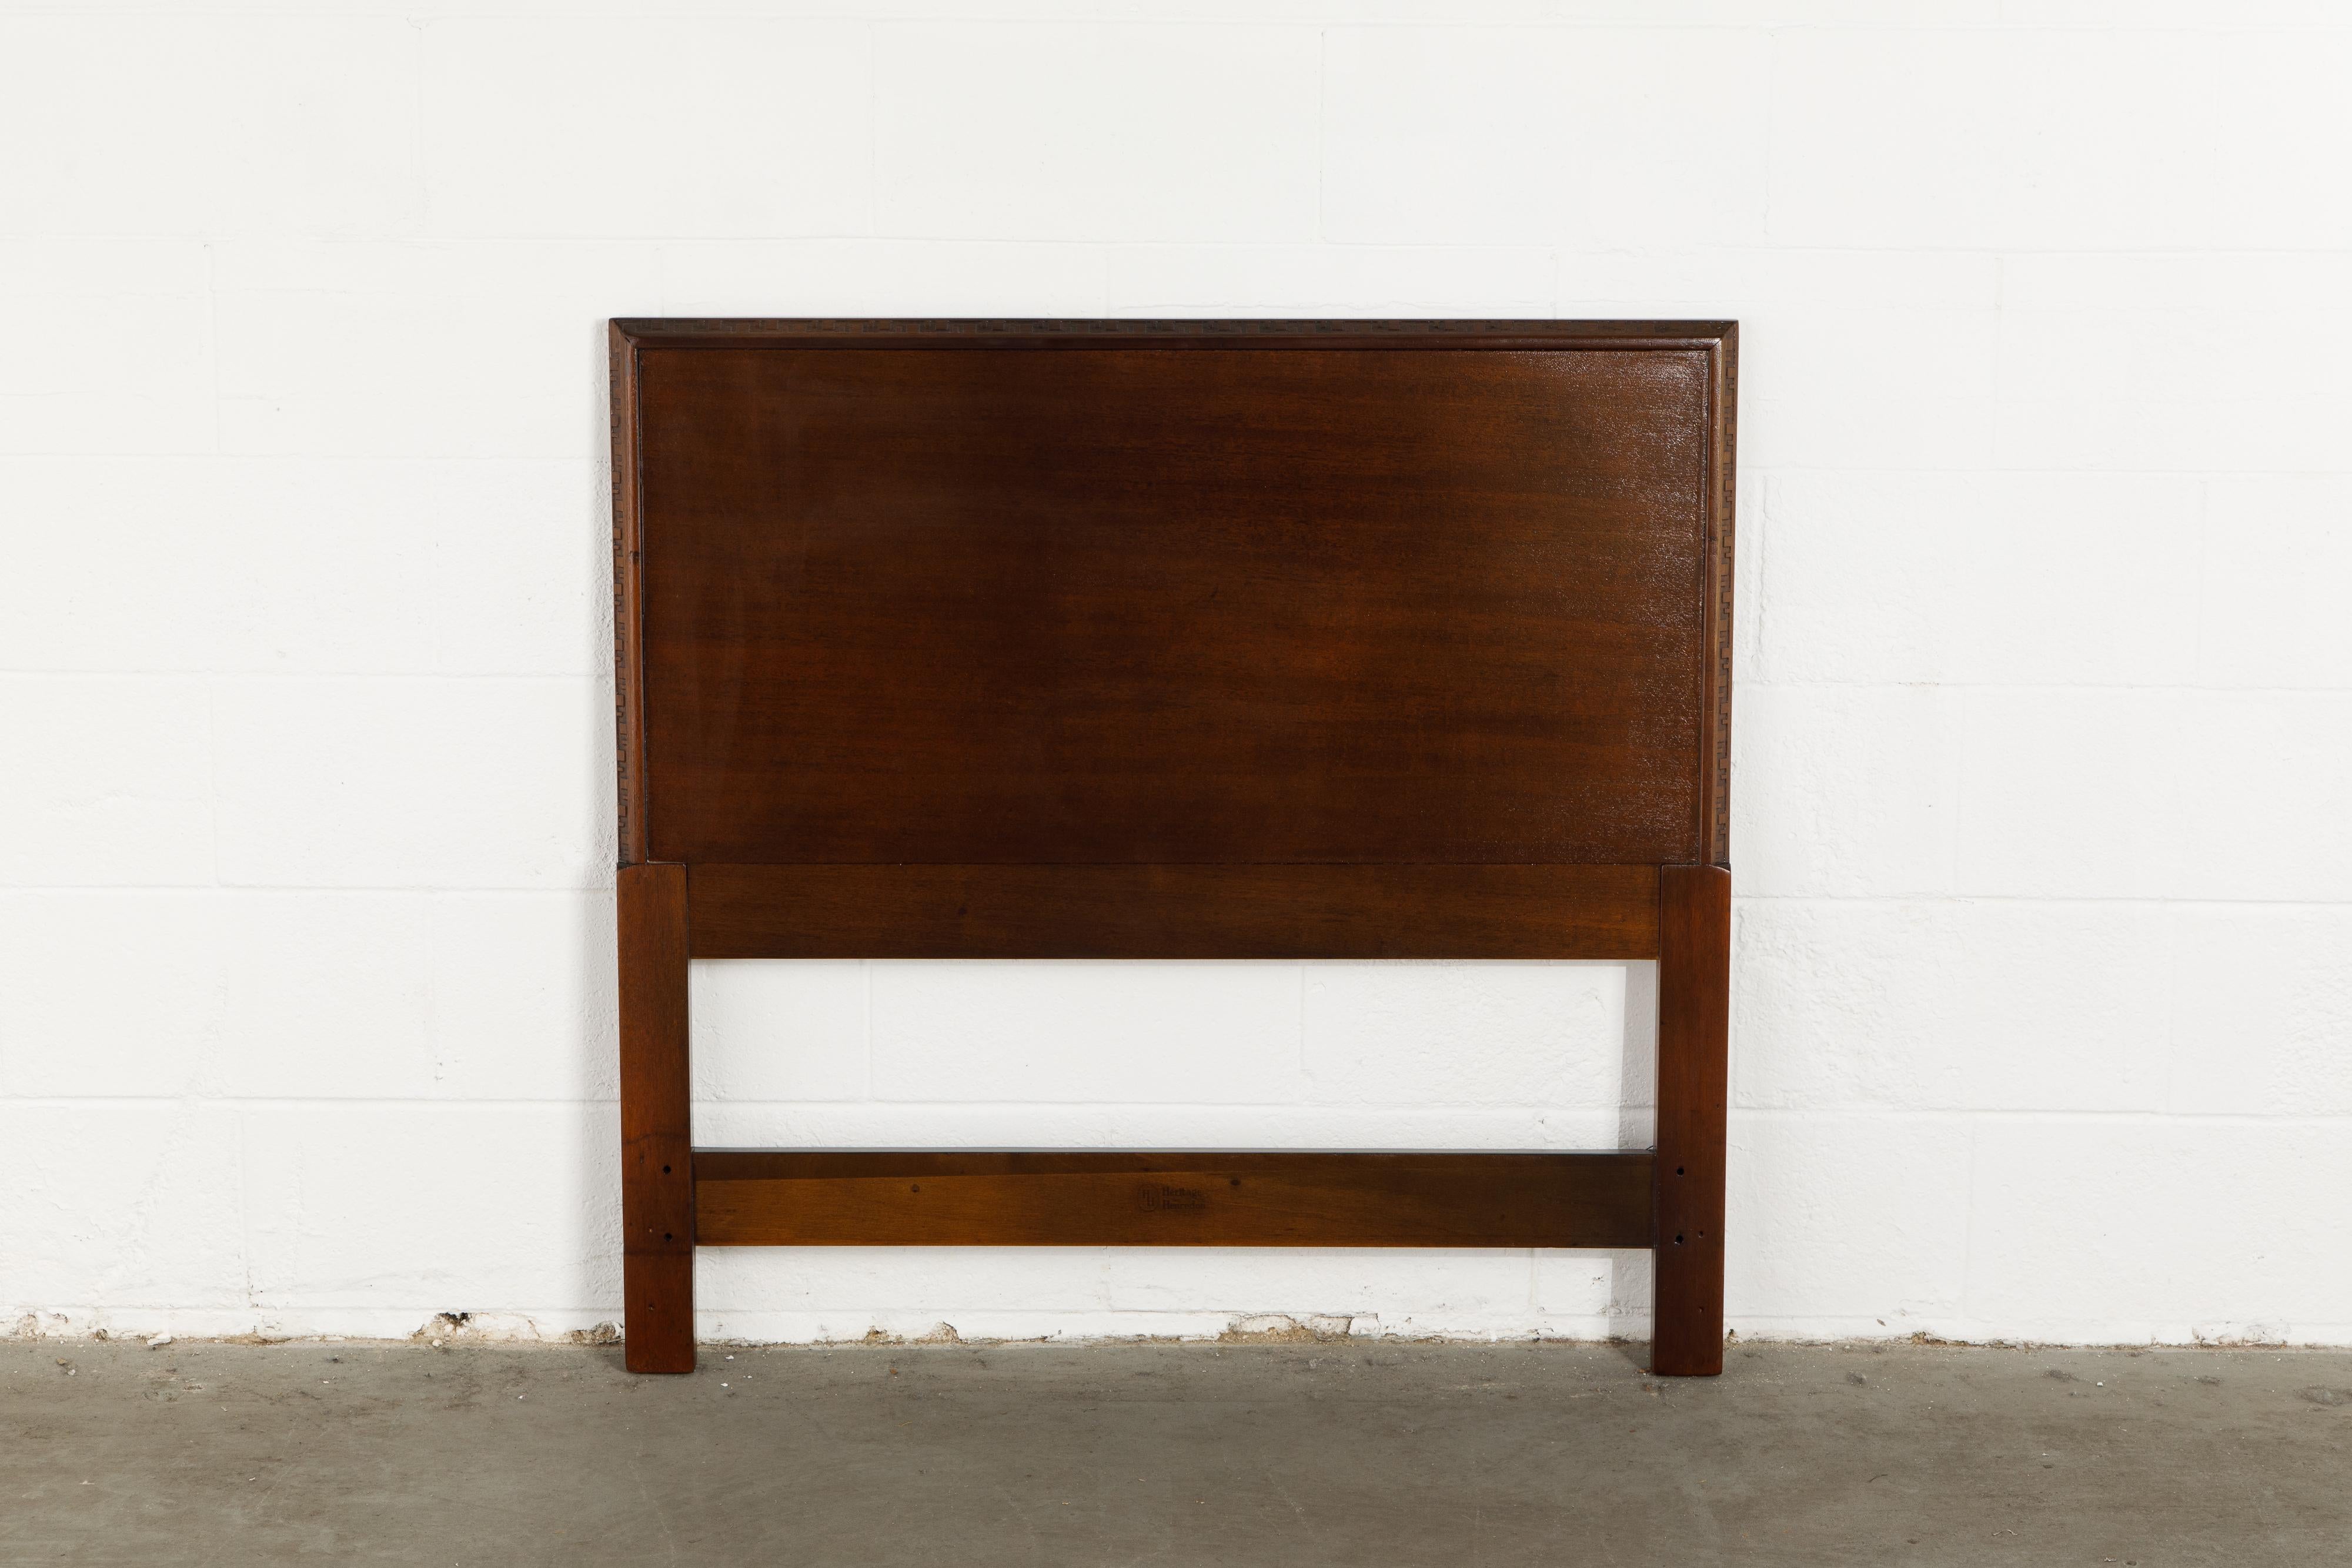 This gorgeously refinished Honduran Mahogany 'Taliesin' Collection headboard for a twin sized bed was designed by Frank Lloyd Wright for Heritage-Henredon in 1955 and produced only for two years, therefore is now a highly sought-after and rare